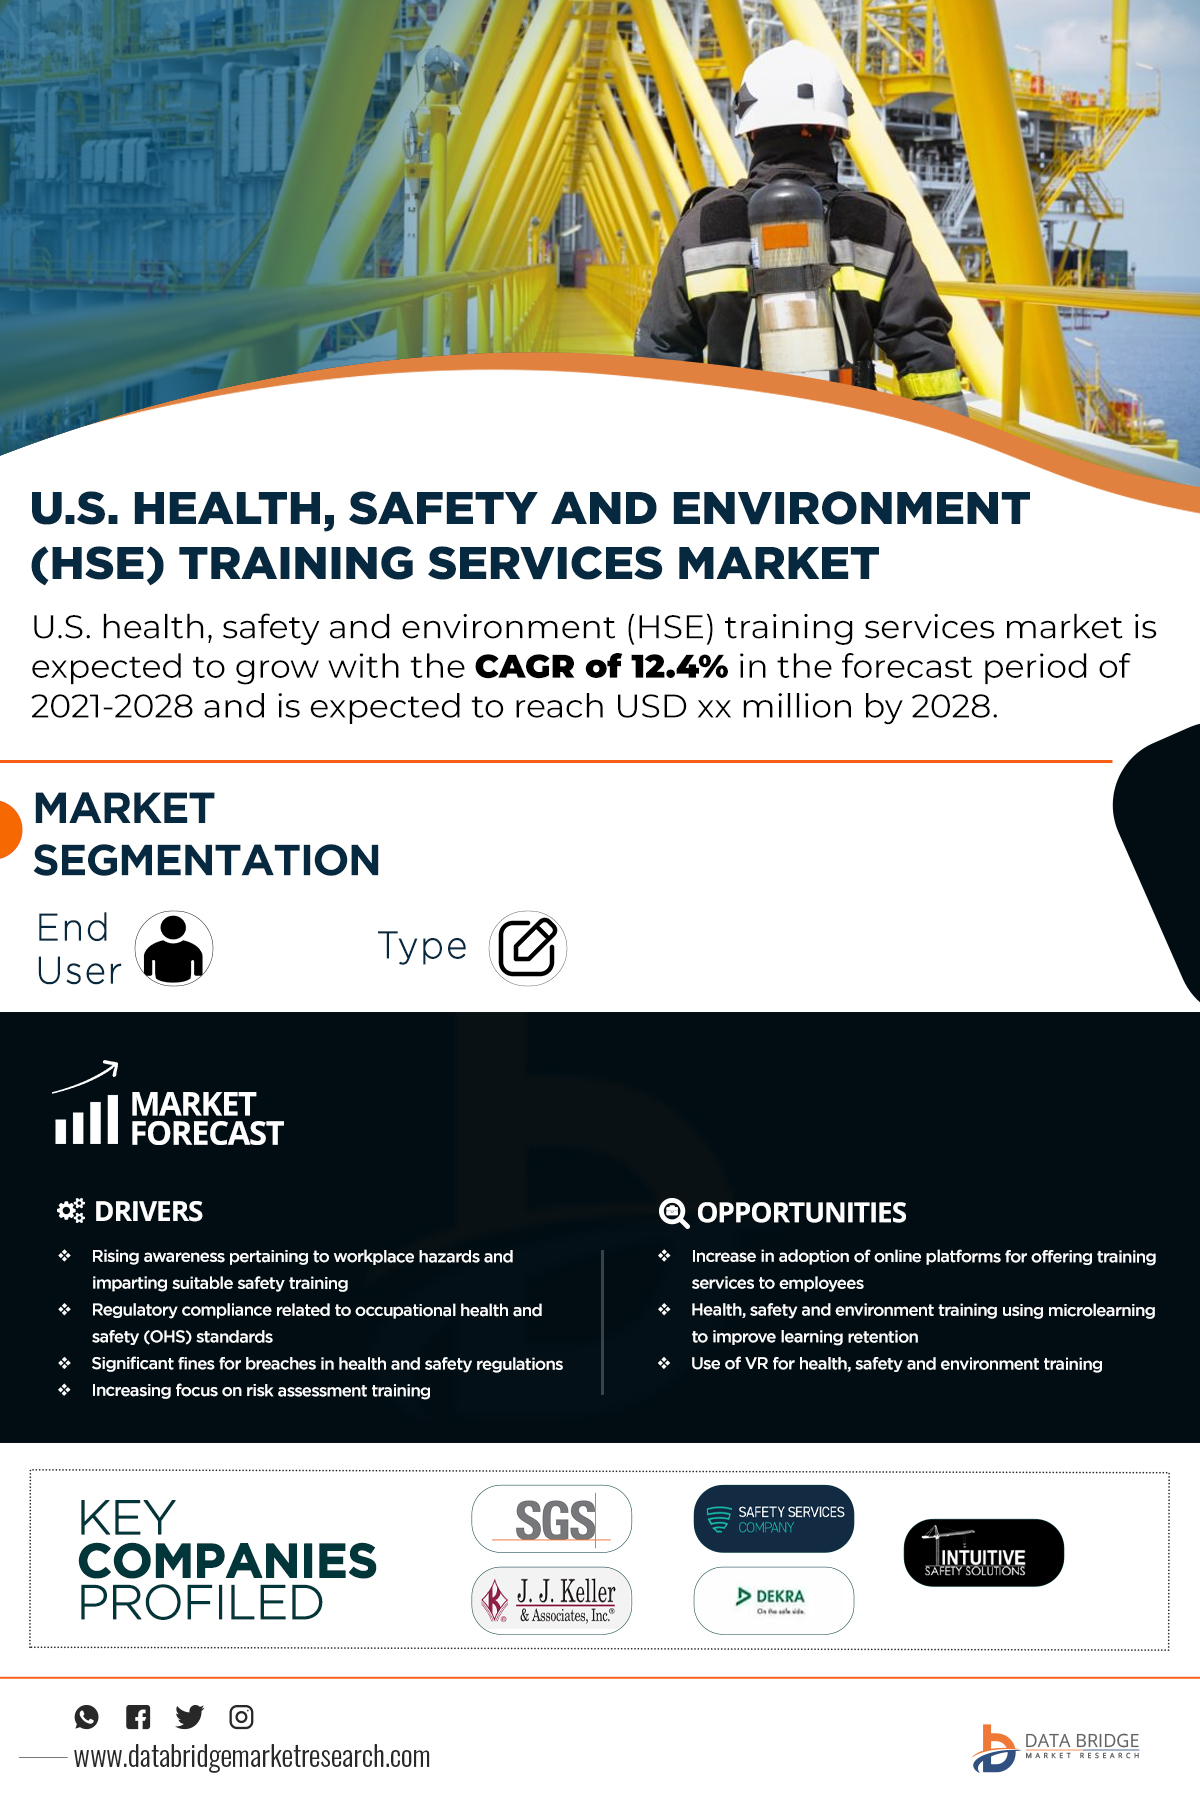 U.S. Health, Safety, And Environment (HSE) Training Services Market